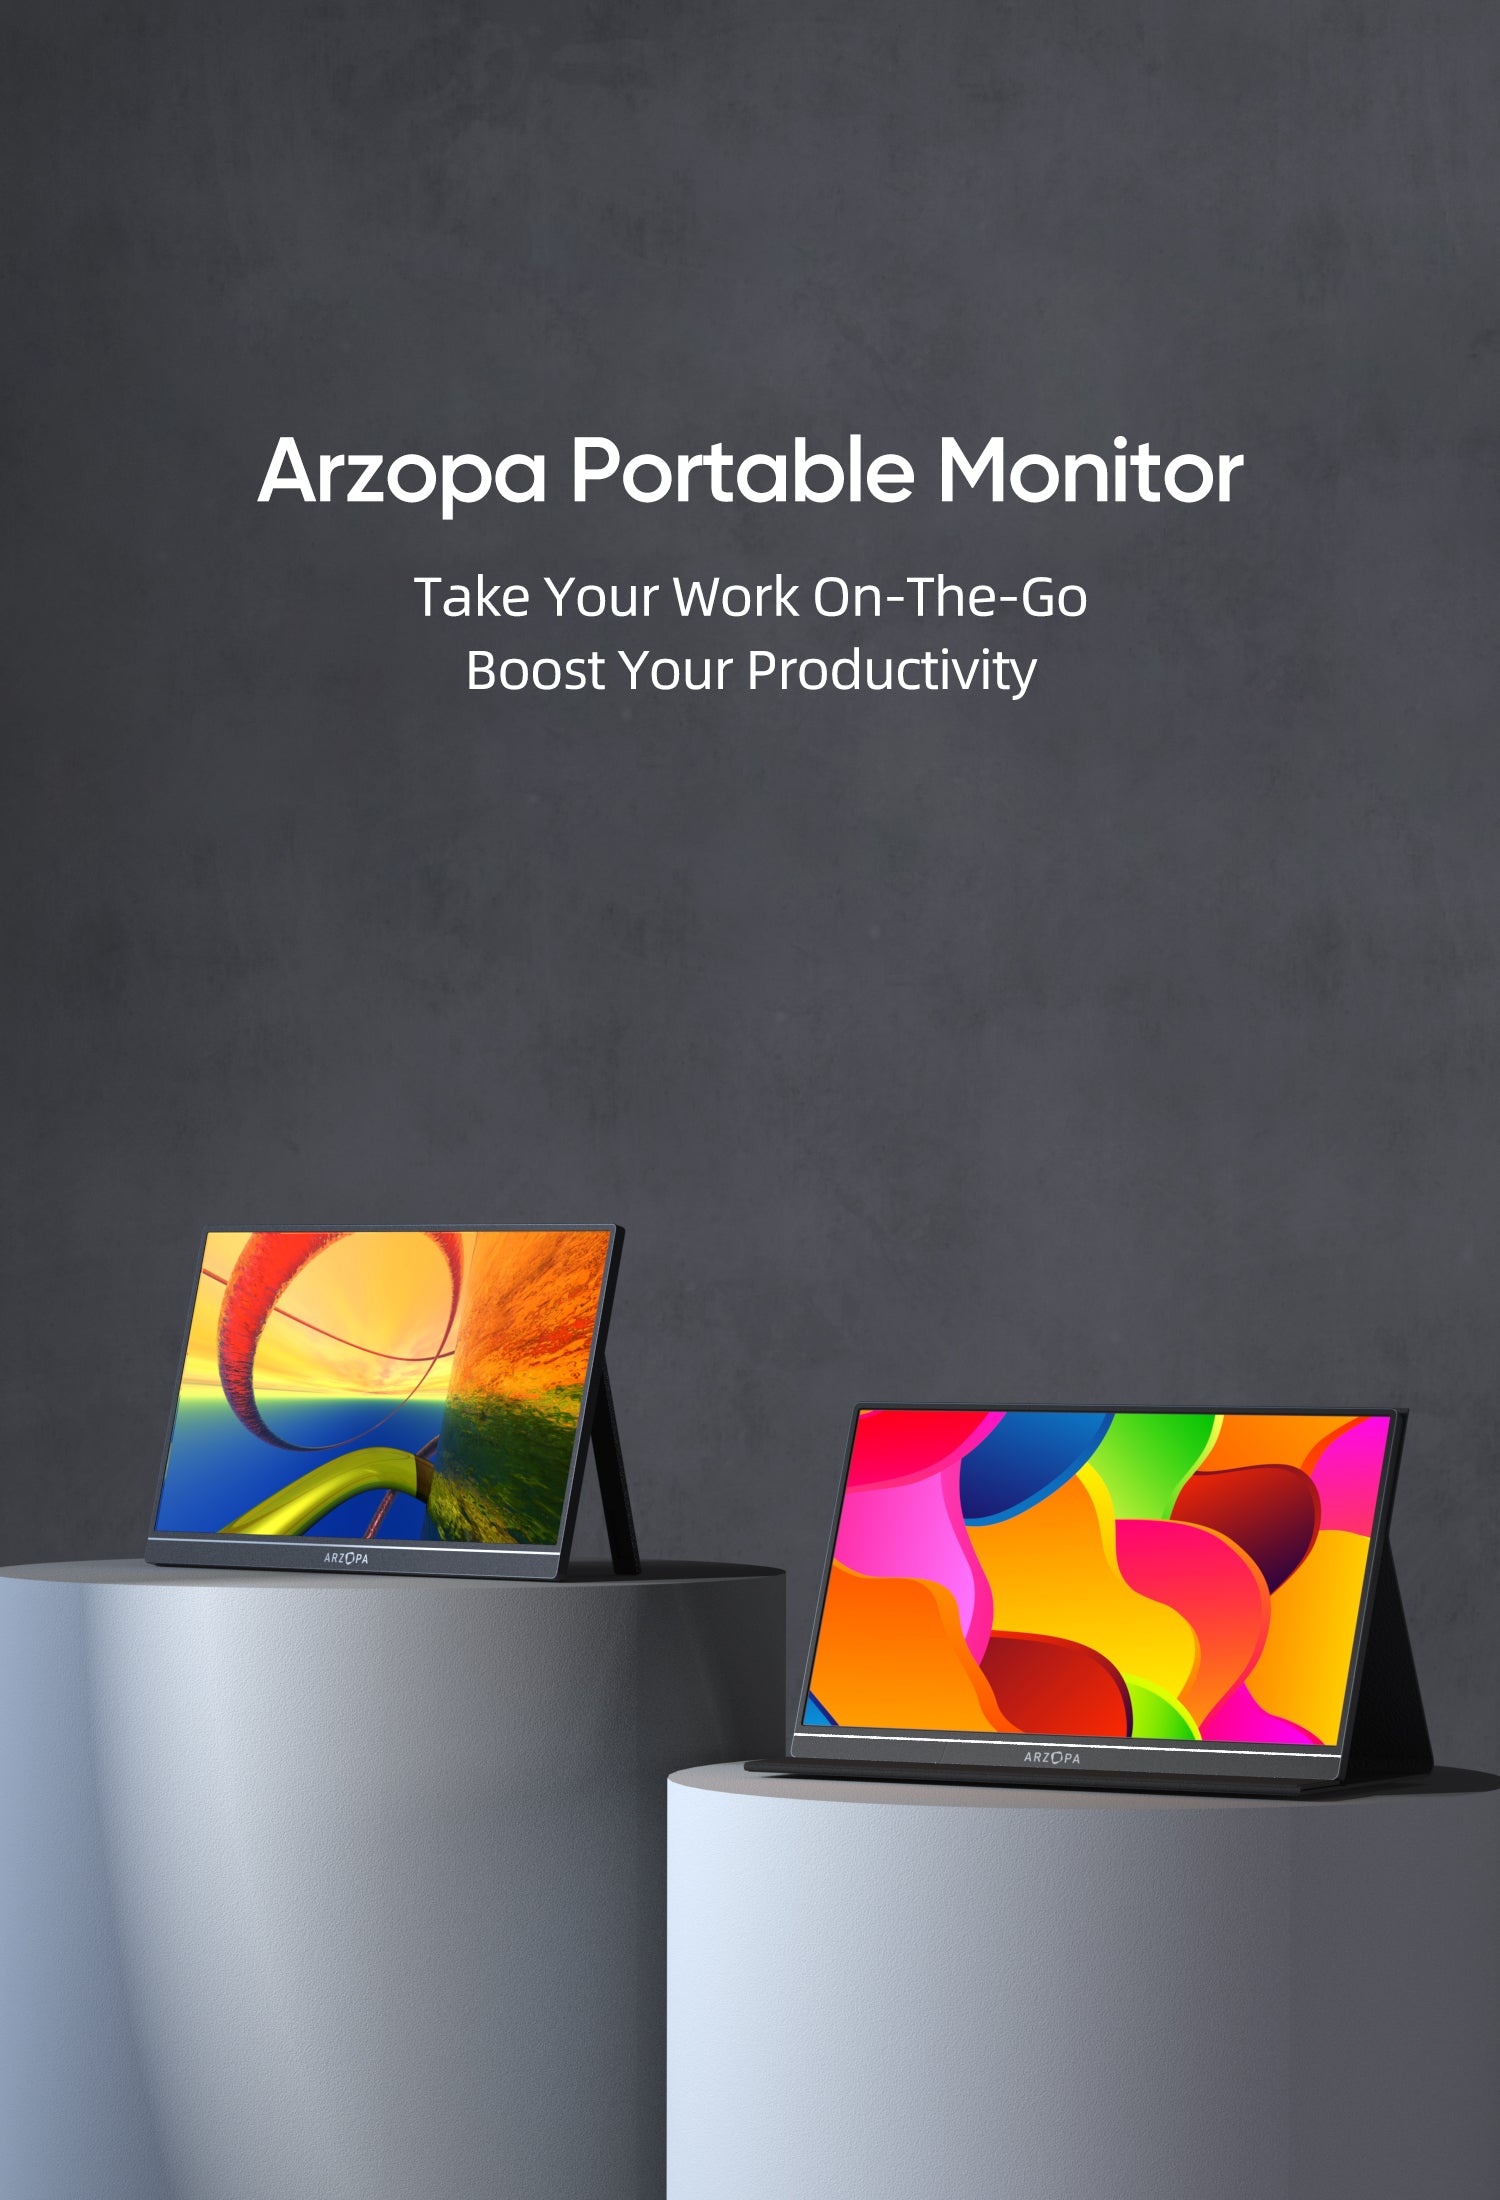 Portable Laptop Monitor - Arzopa A1M